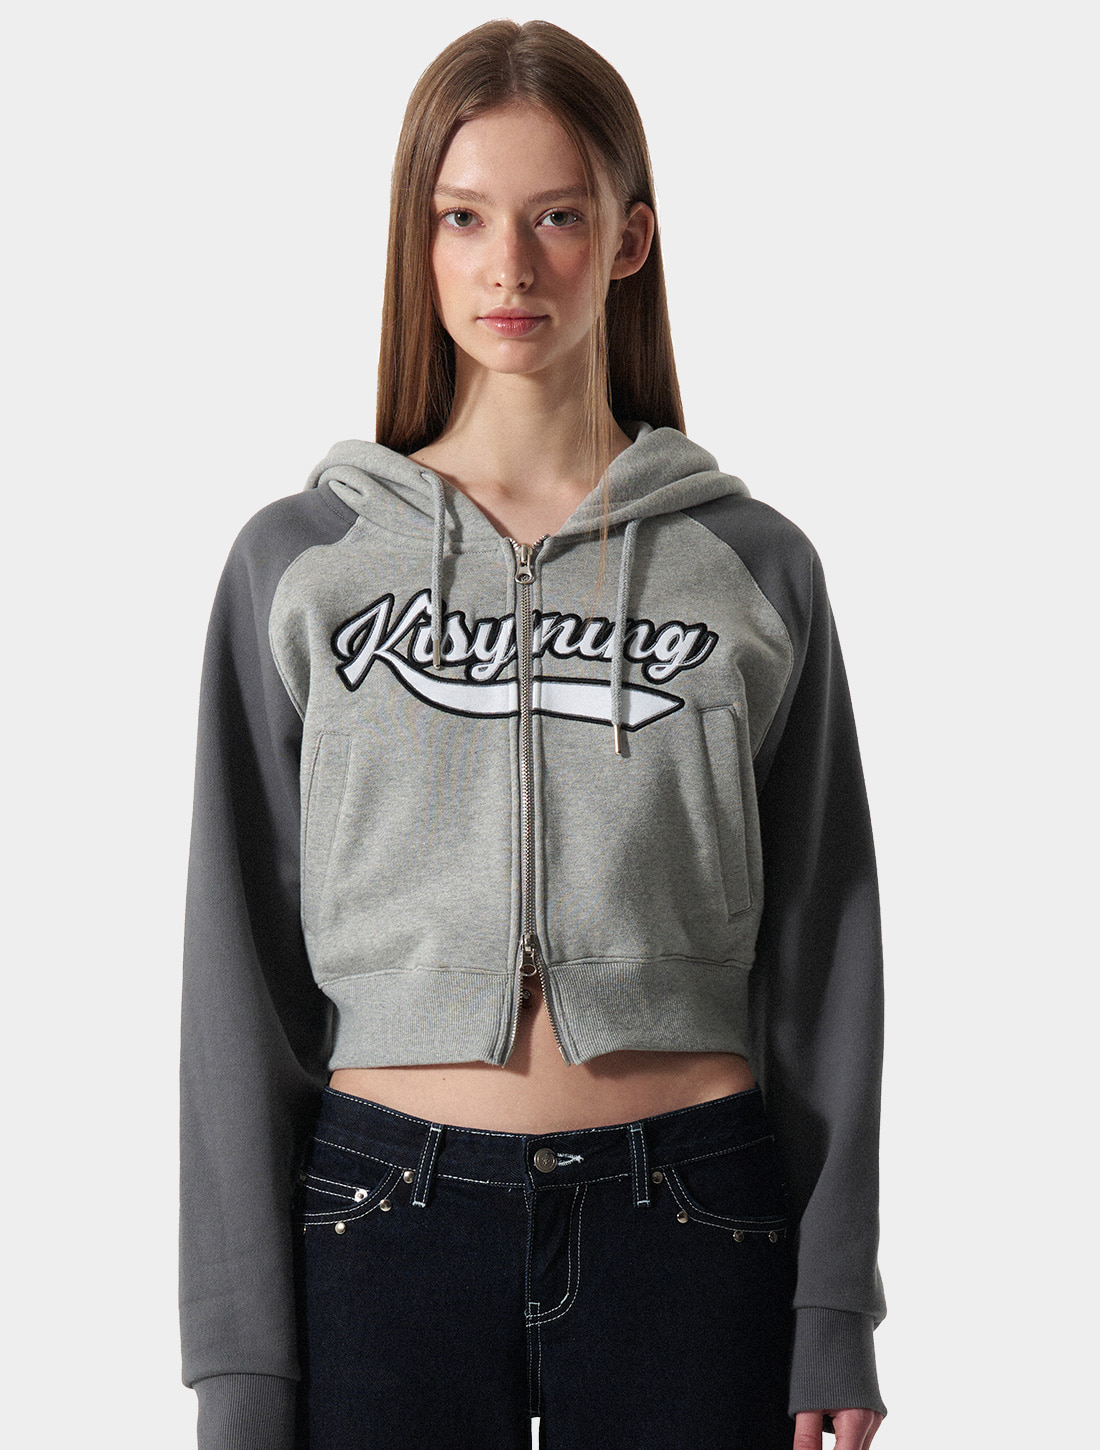 kisyning patch hood zip up